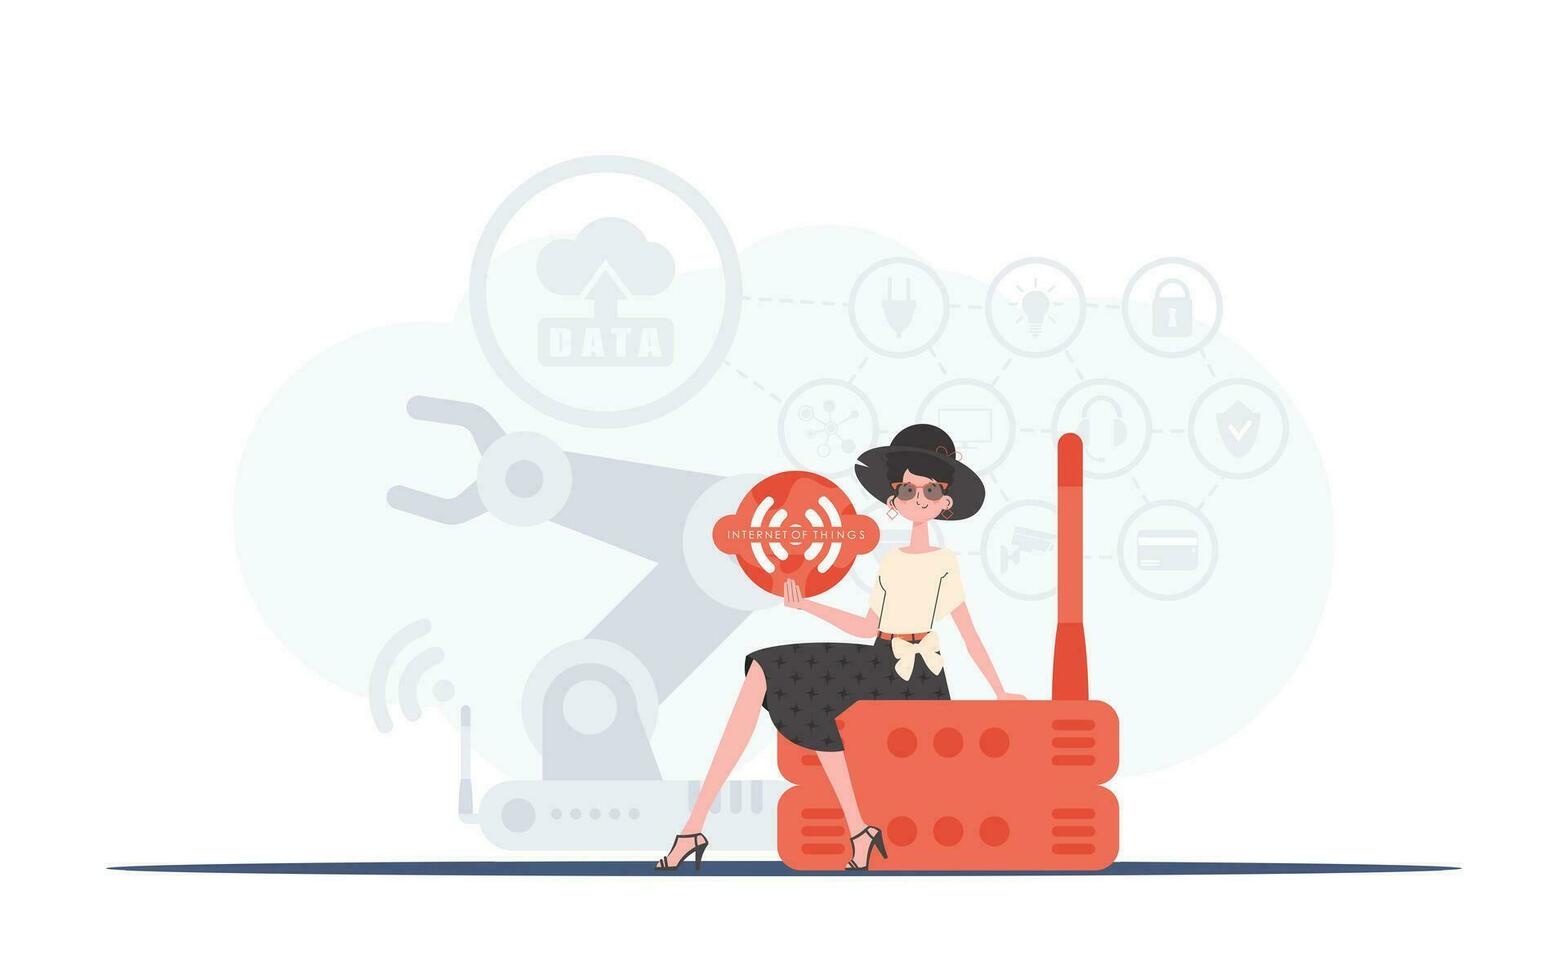 Internet of things concept. A woman is holding an internet thing icon in her hands. Router and server. Good for websites and presentations. Vector illustration in trendy flat style.